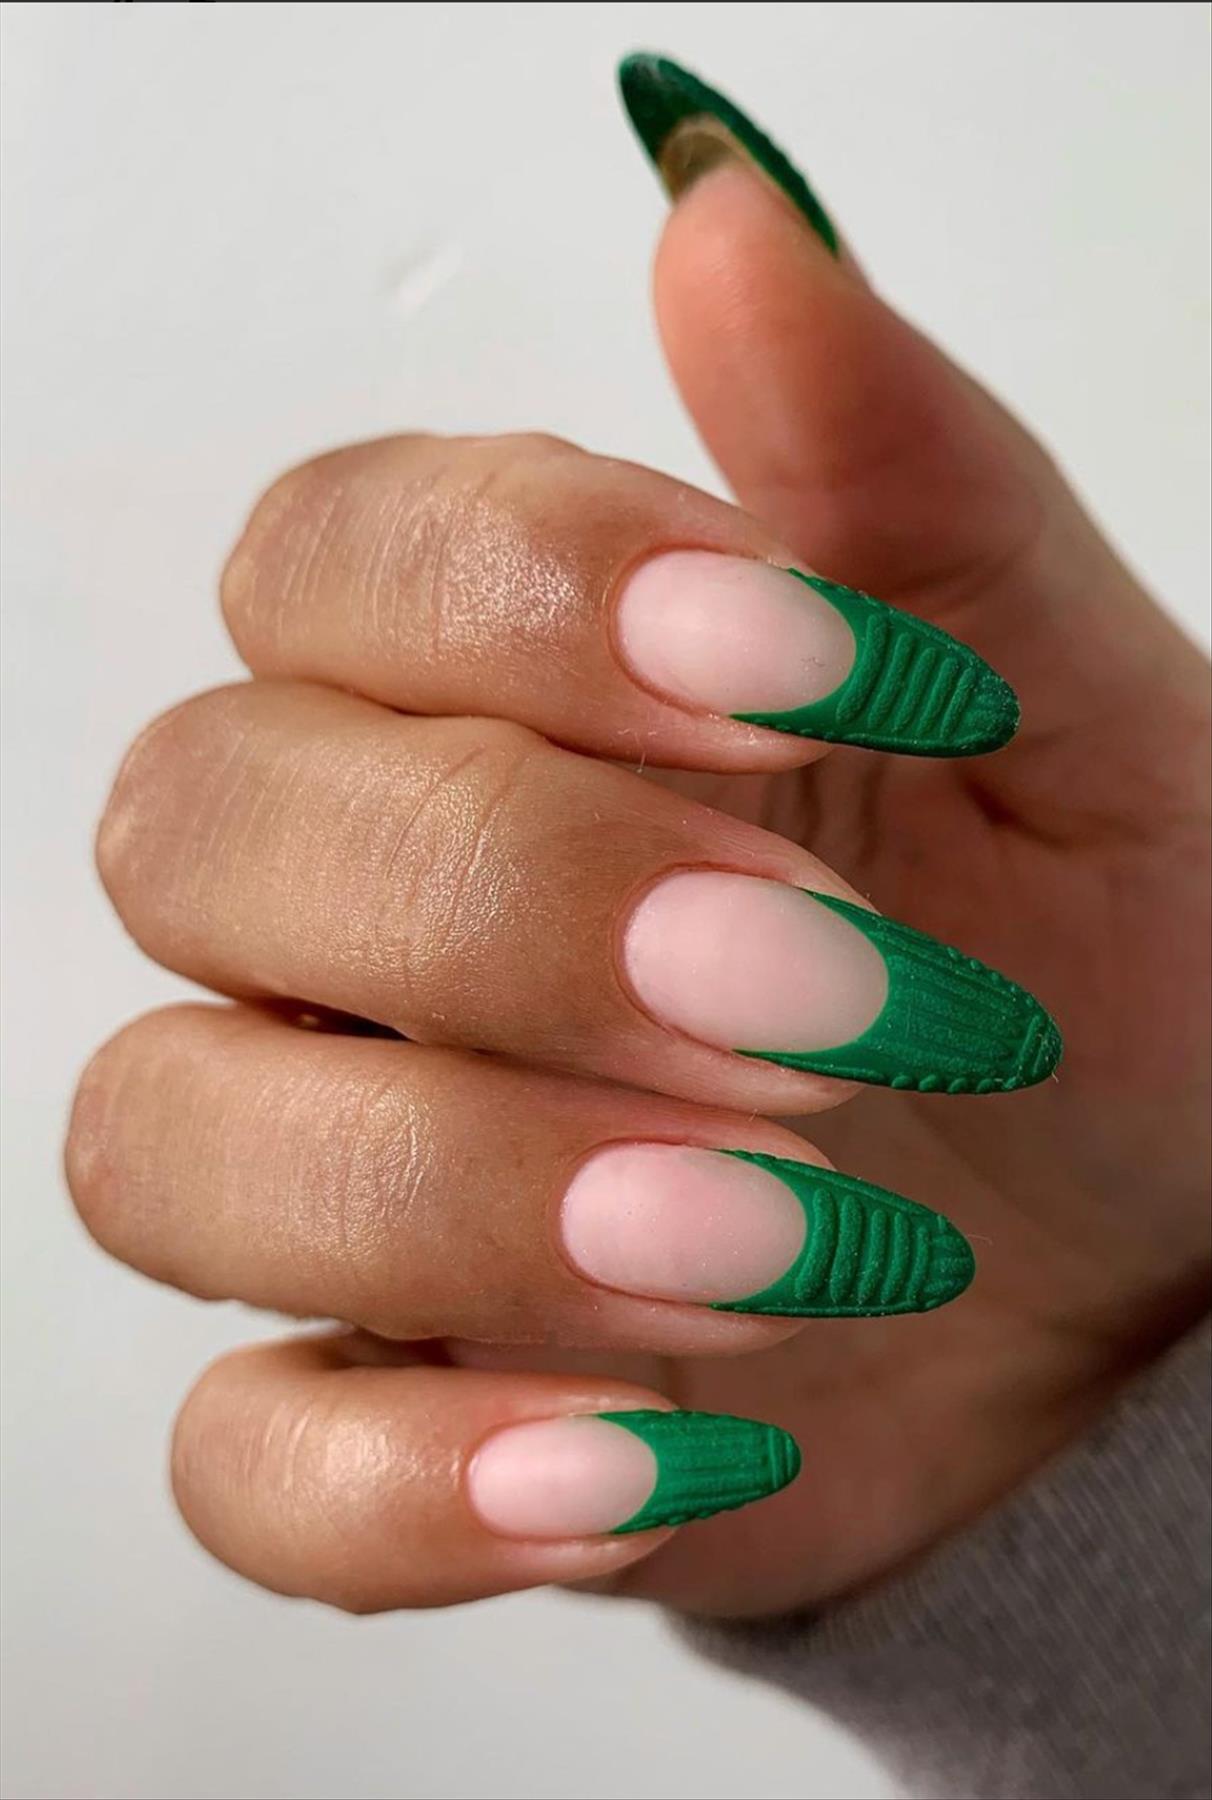 Pretty Spring Nails Designs 2022 with almond shape nails